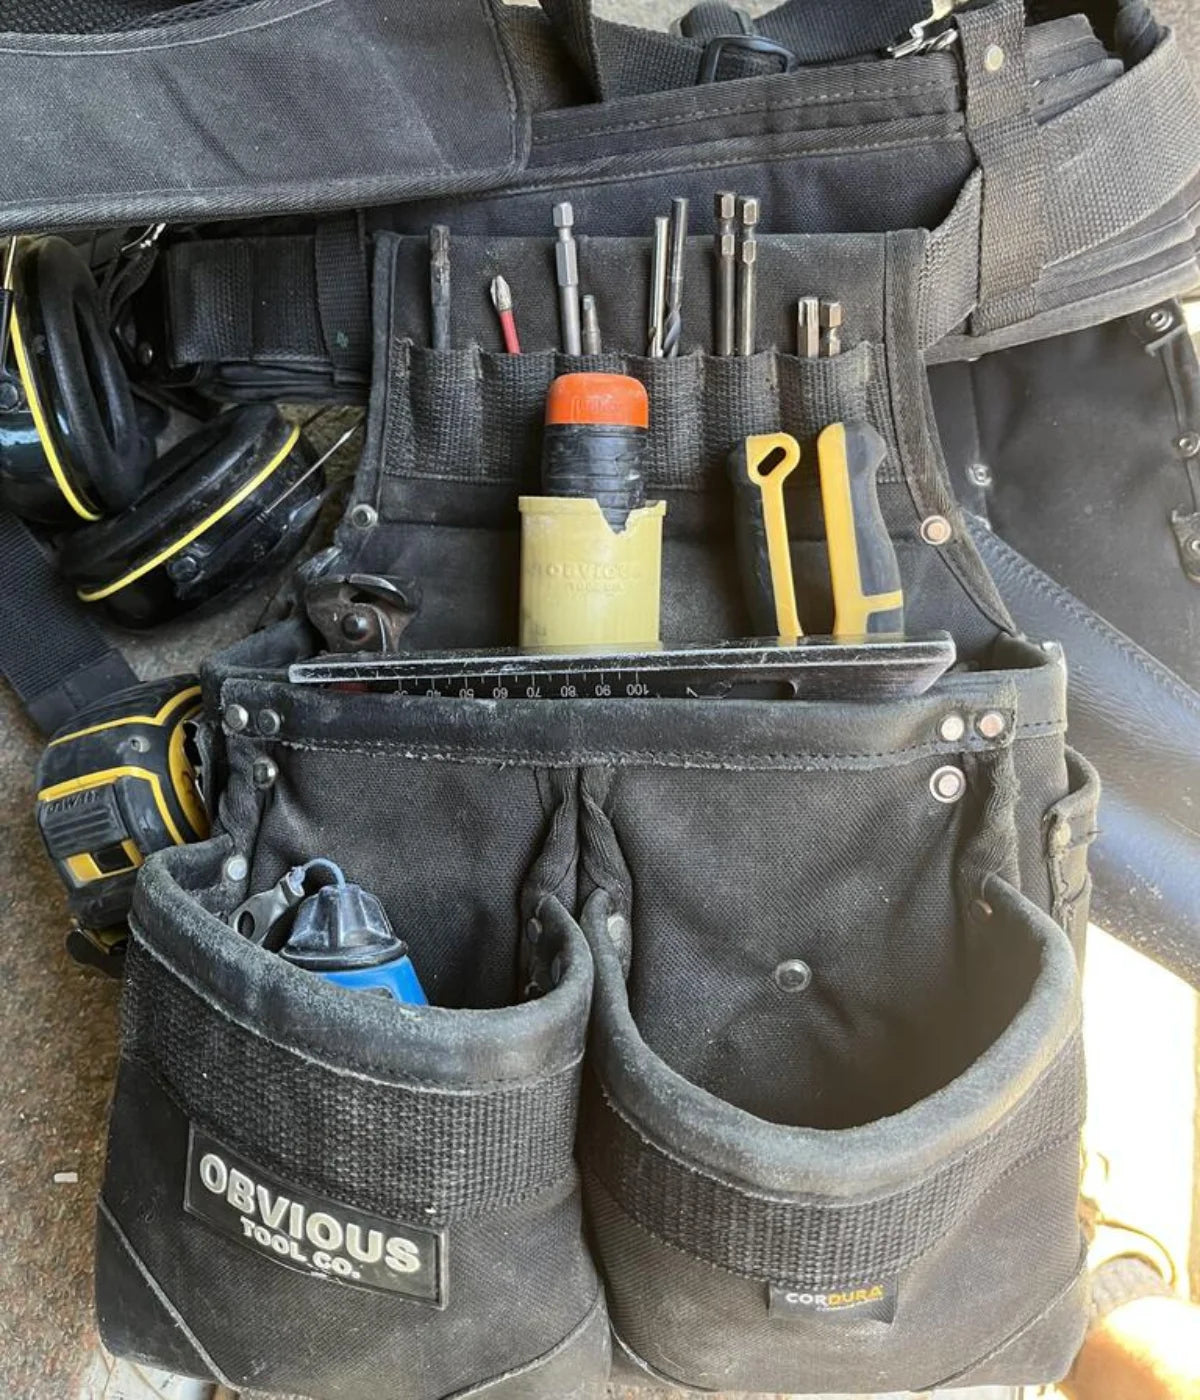 Obvious Tool Co. - Tool belt systems, designed for the tools we carry